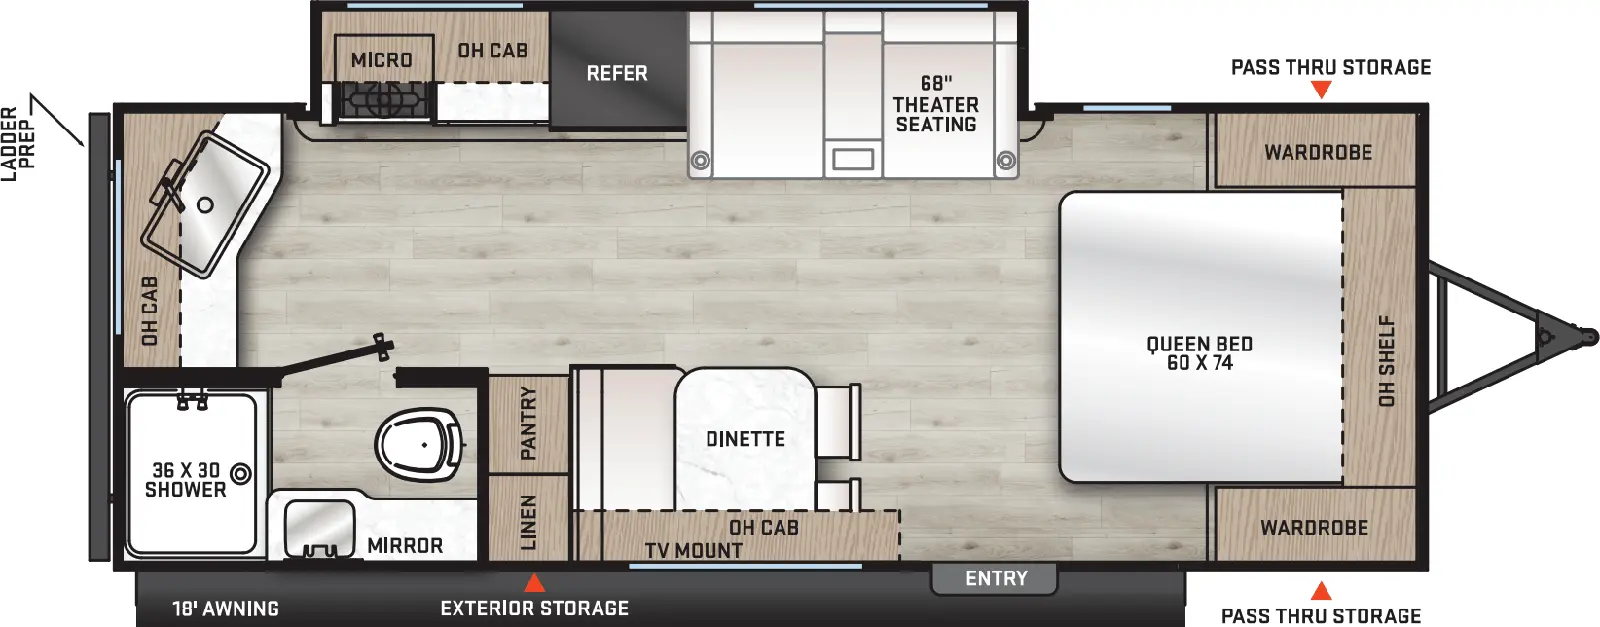 The 22MLS has one slideout and one entry. Exterior features front pass-thru storage, 10 foot awning, and ladder prep. Interior layout front to back: foot-facing queen bed with overhead shelf and wardrobes on each side; off-door side slideout with theater seating, refrigerator, kitchen counter with cooktop, and overhead cabinet with microwave; door side entry, dinette, overhead cabinet, TV mount, pantry, and linen closet; rear door side full bathroom with mirror, and rear kitchen counter with sink and overhead cabinet.